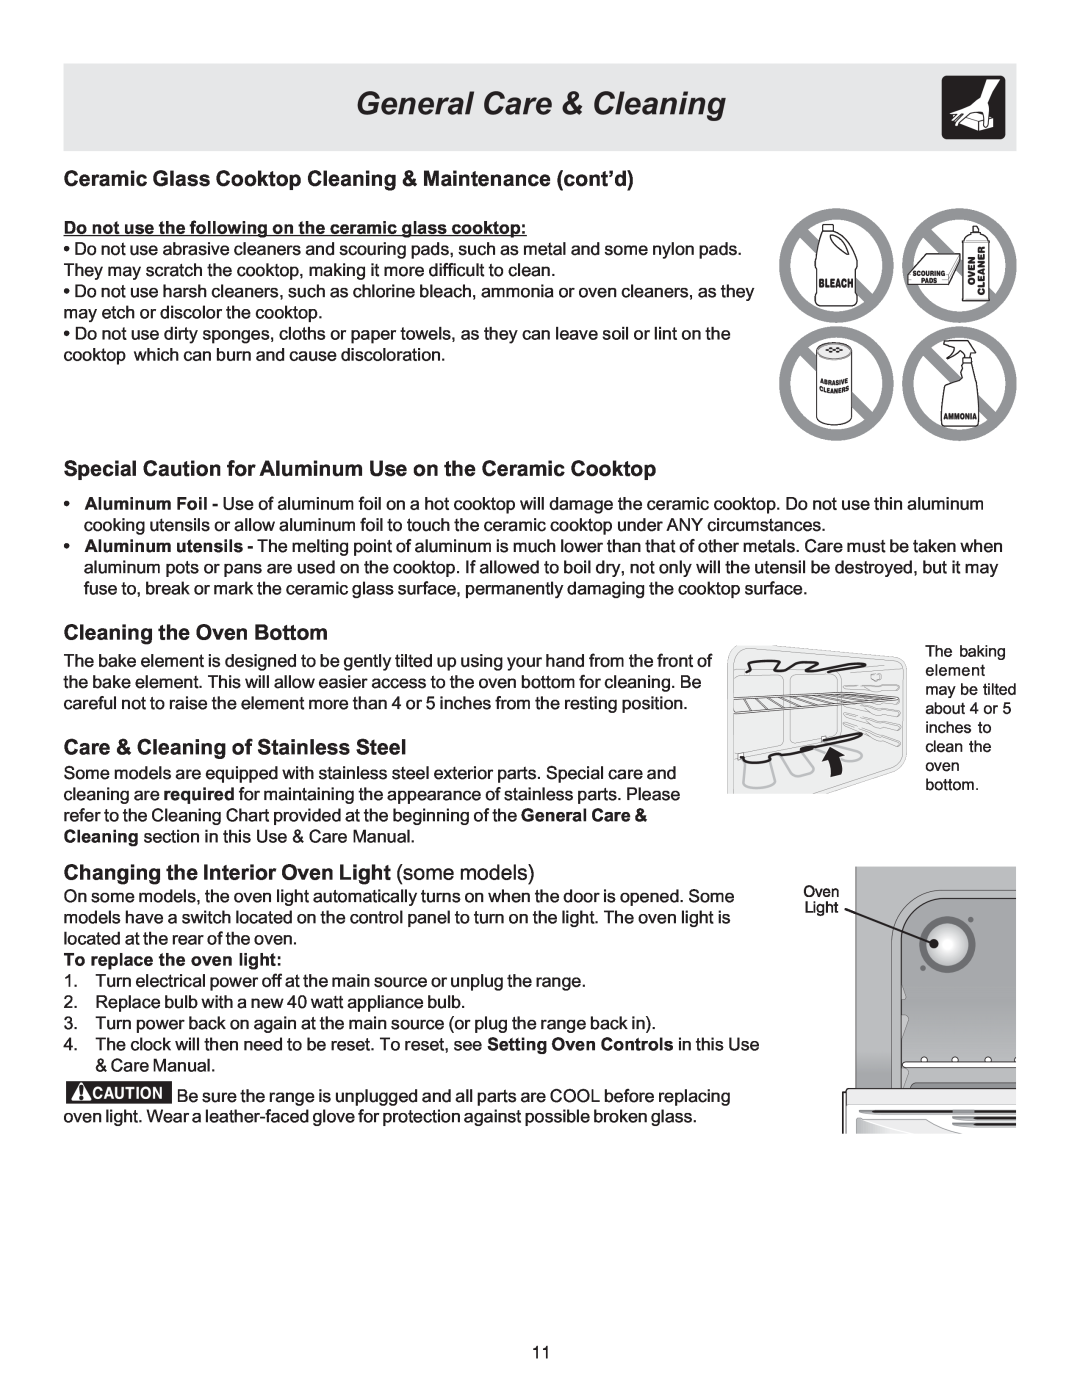 Crosley ES100 Ceramic Glass Cooktop Cleaning & Maintenance cont’d, Special Caution for Aluminum Use on the Ceramic Cooktop 